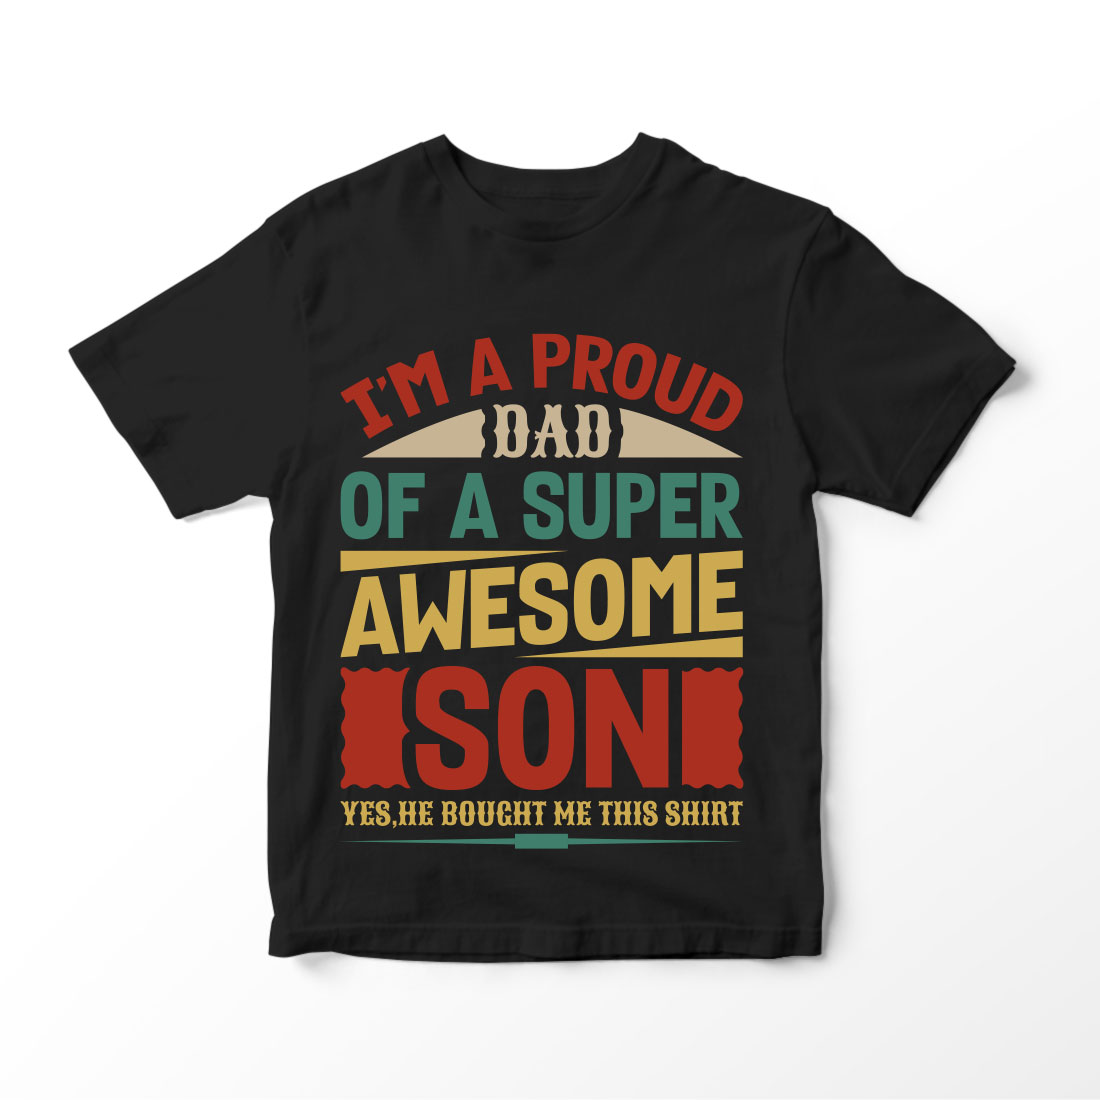 fathers day t shirt dad t shirt design father day tshirt happy fathers day t shirt design ideas dad day papa son fathers day shirt ideas for family 2 954